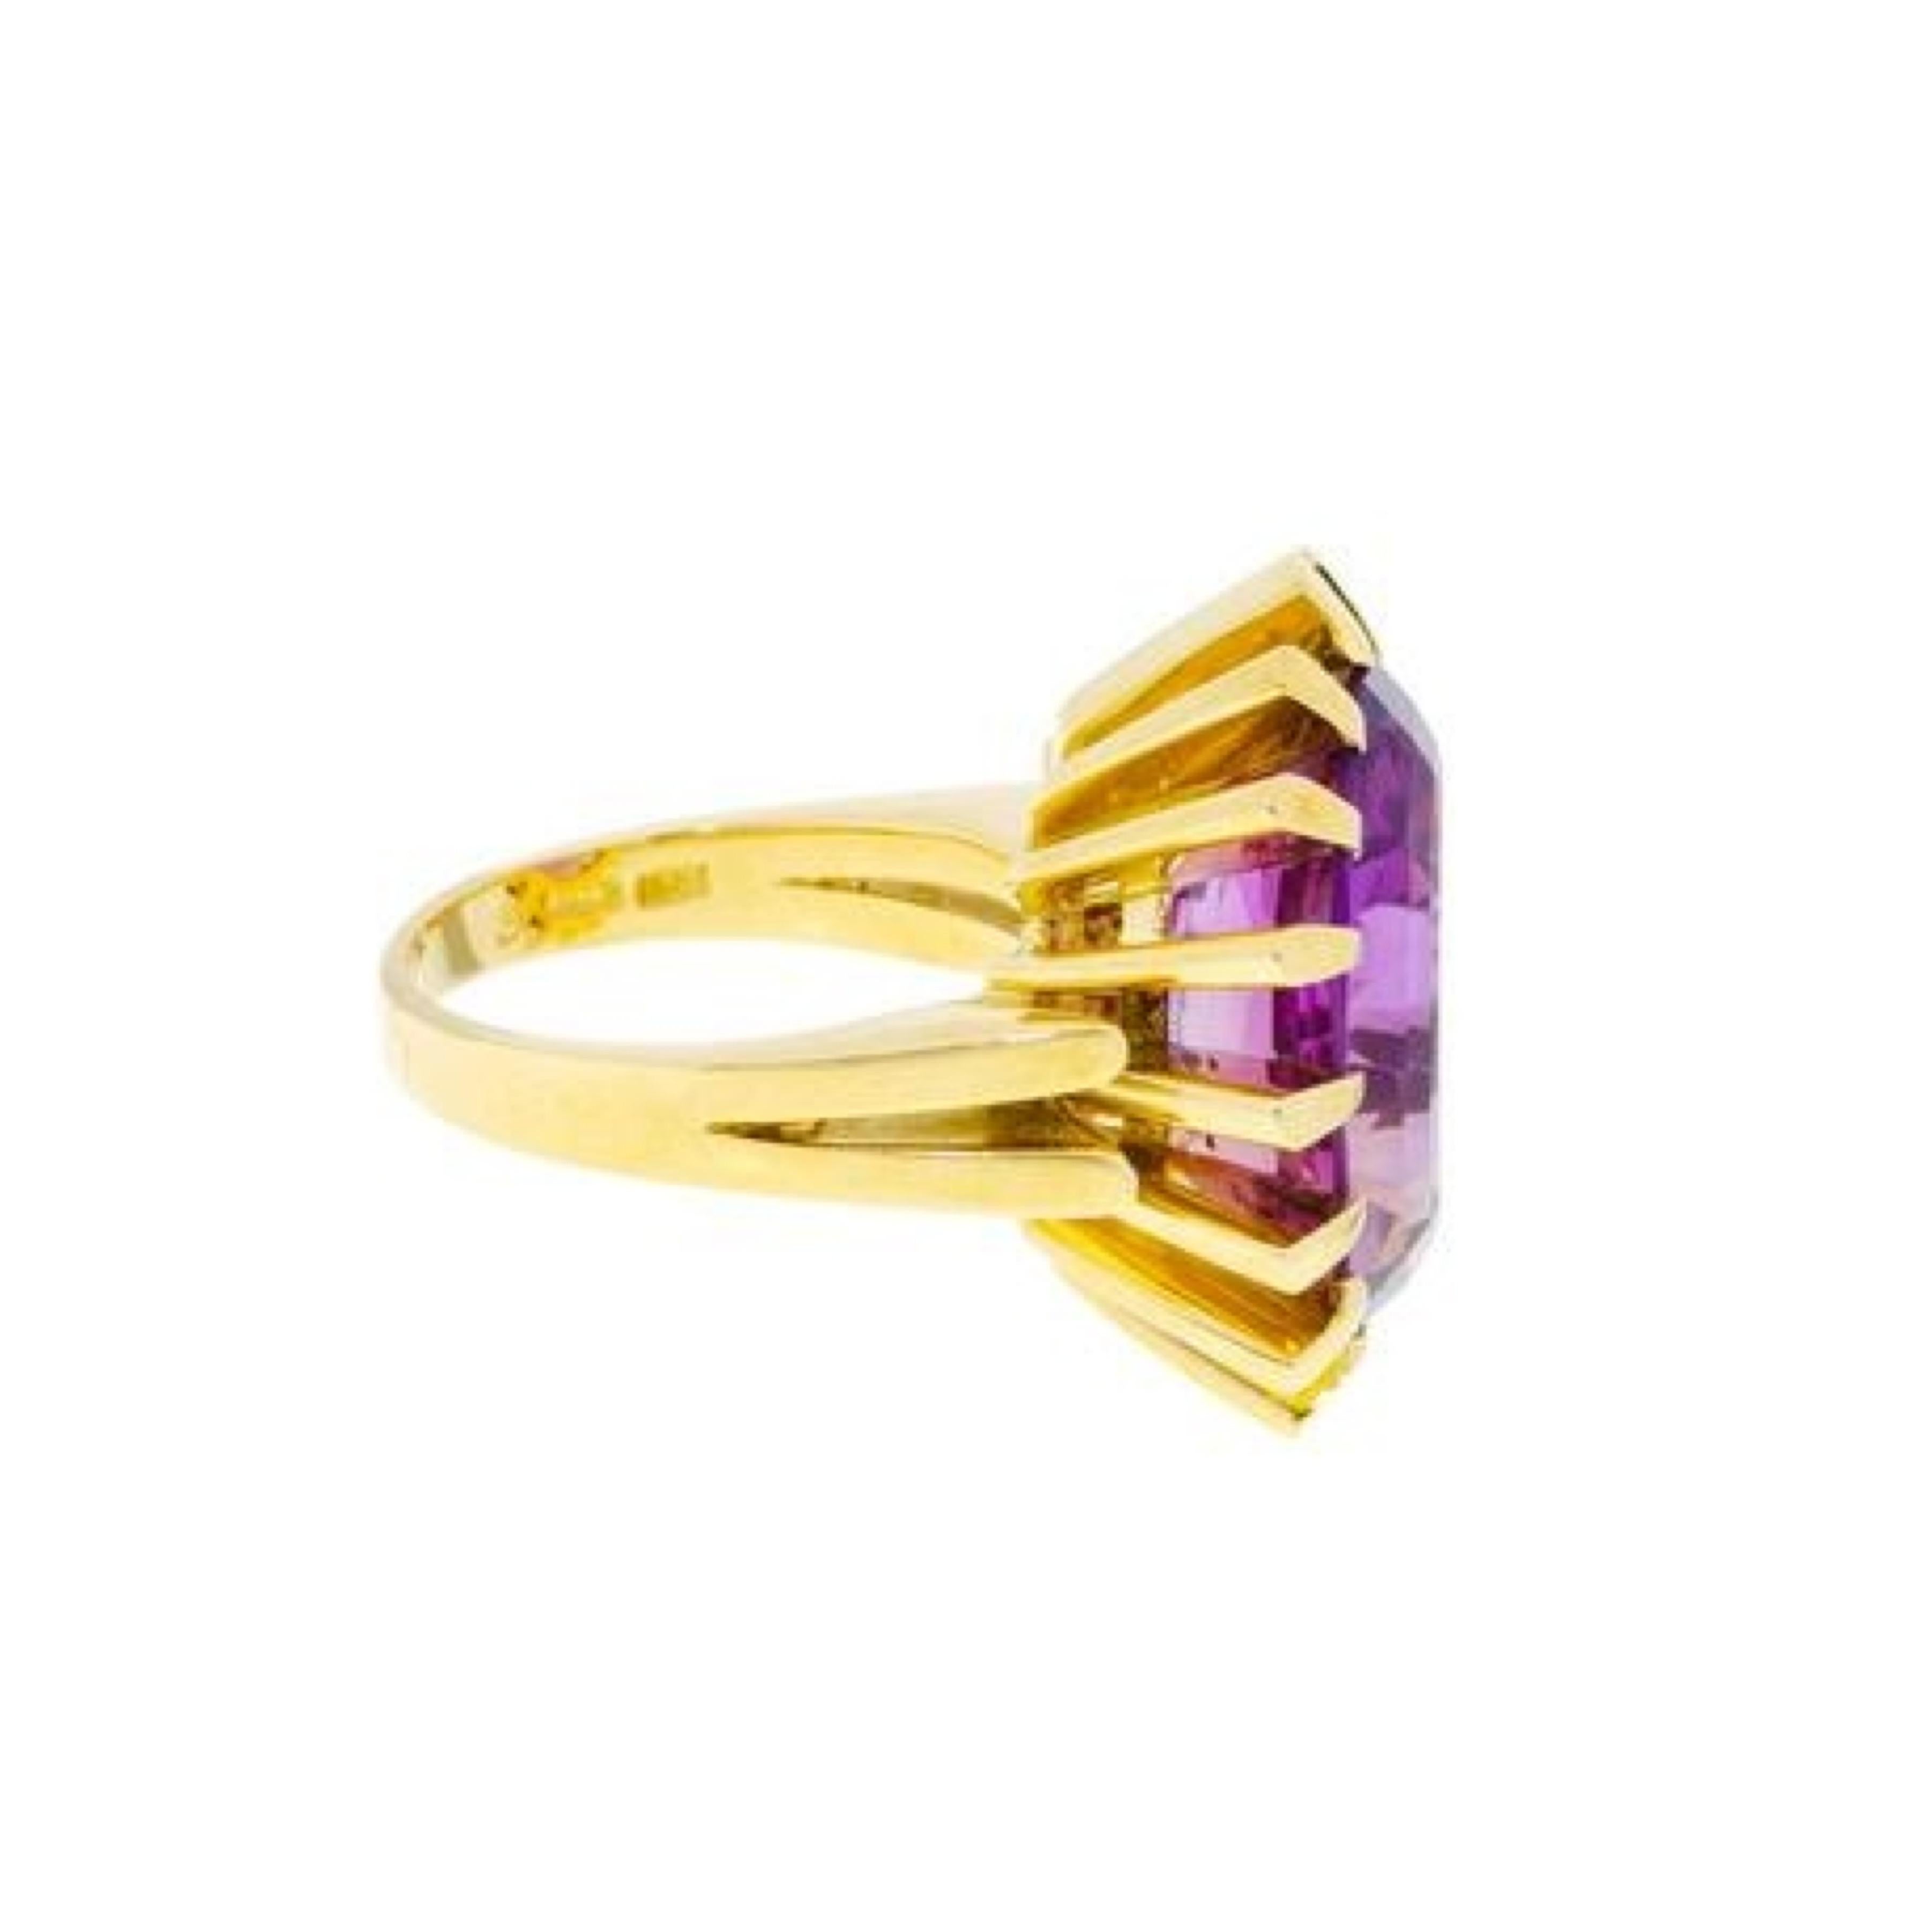 Beautiful yellow gold ring set with an oval cut amethyst. Beautiful and original modernist frame with 16 prongs.

Estimated weight of the amethyst: 14 carats

Dimensions : 21.48 x 26.05 x 11.09 mm (0.845 x 1.025 x 0.436 inch)

Finger size: 56.5 (US: